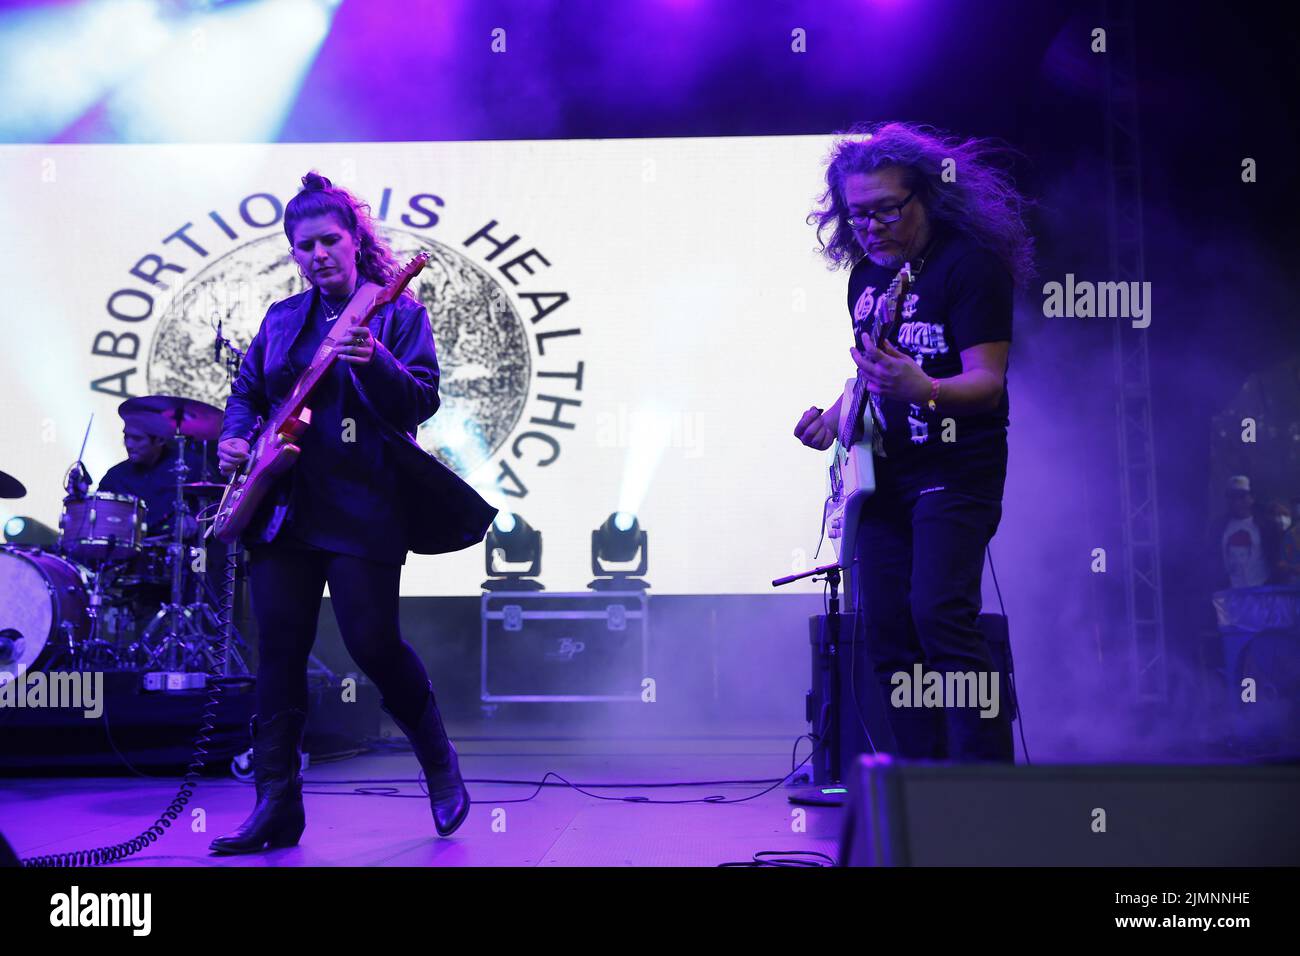 Best Coast - Bethany Cosentino amd Bobb Bruno perform during the 2022 Outside Lands Music and Arts Festival at Golden Gate Park on August 05, 2022 in San Francisco, California. Photo: Christopher Victorio/imageSPACE/MediaPunch Stock Photo